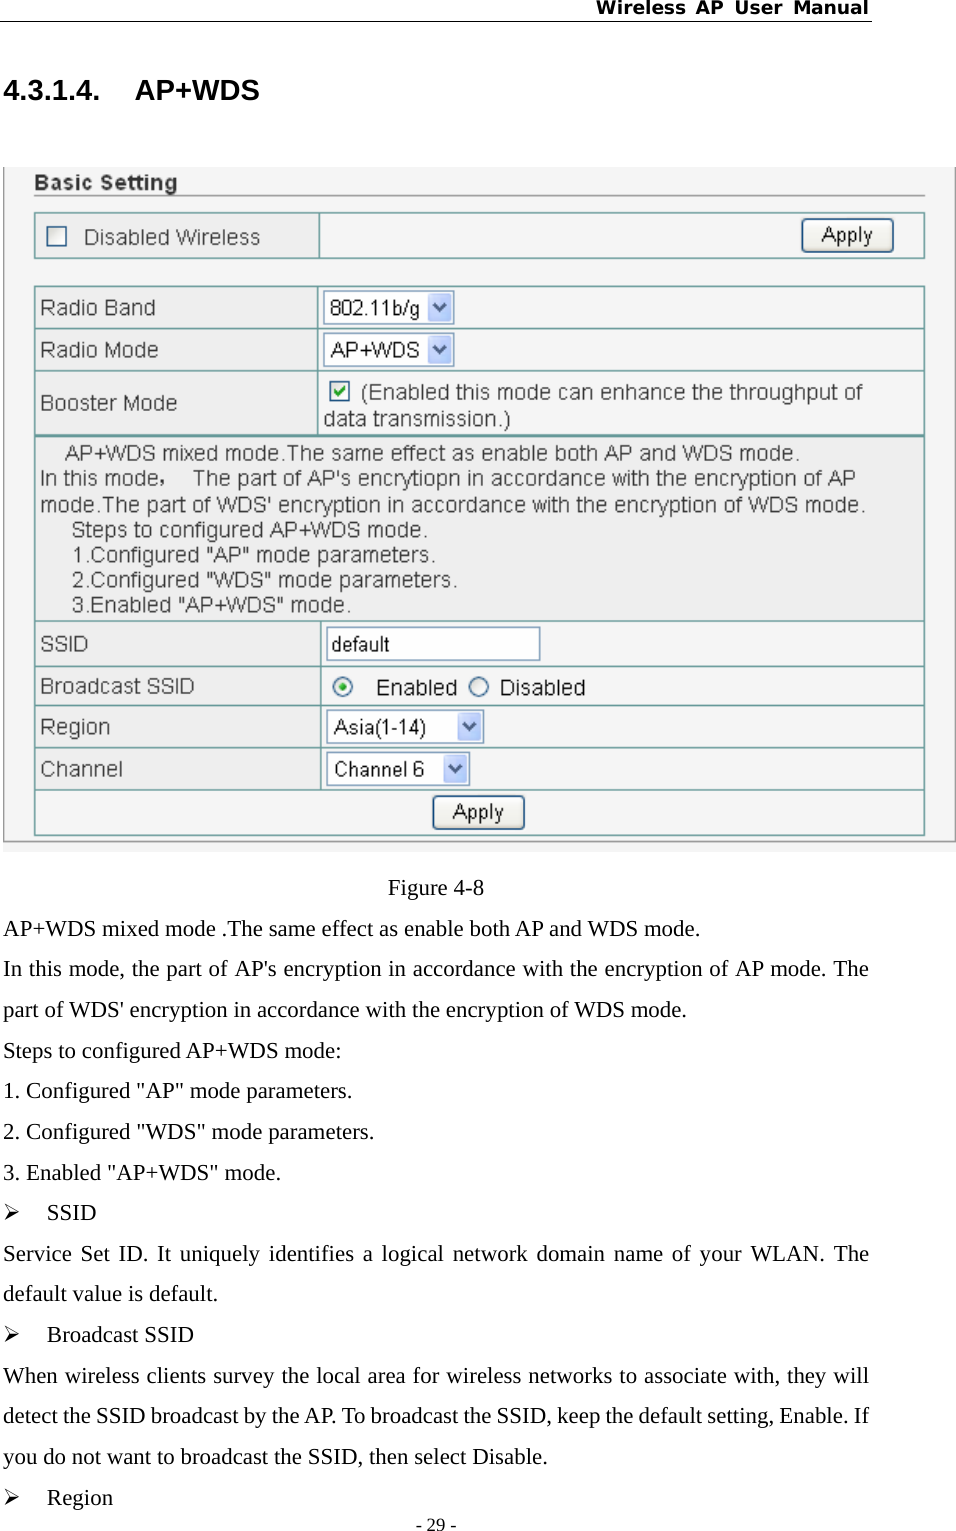 Wireless AP User Manual - 29 -  4.3.1.4. AP+WDS  Figure 4-8 AP+WDS mixed mode .The same effect as enable both AP and WDS mode. In this mode, the part of AP&apos;s encryption in accordance with the encryption of AP mode. The part of WDS&apos; encryption in accordance with the encryption of WDS mode.  Steps to configured AP+WDS mode:   1. Configured &quot;AP&quot; mode parameters. 2. Configured &quot;WDS&quot; mode parameters. 3. Enabled &quot;AP+WDS&quot; mode. ¾ SSID Service Set ID. It uniquely identifies a logical network domain name of your WLAN. The default value is default. ¾ Broadcast SSID When wireless clients survey the local area for wireless networks to associate with, they will detect the SSID broadcast by the AP. To broadcast the SSID, keep the default setting, Enable. If you do not want to broadcast the SSID, then select Disable. ¾ Region 